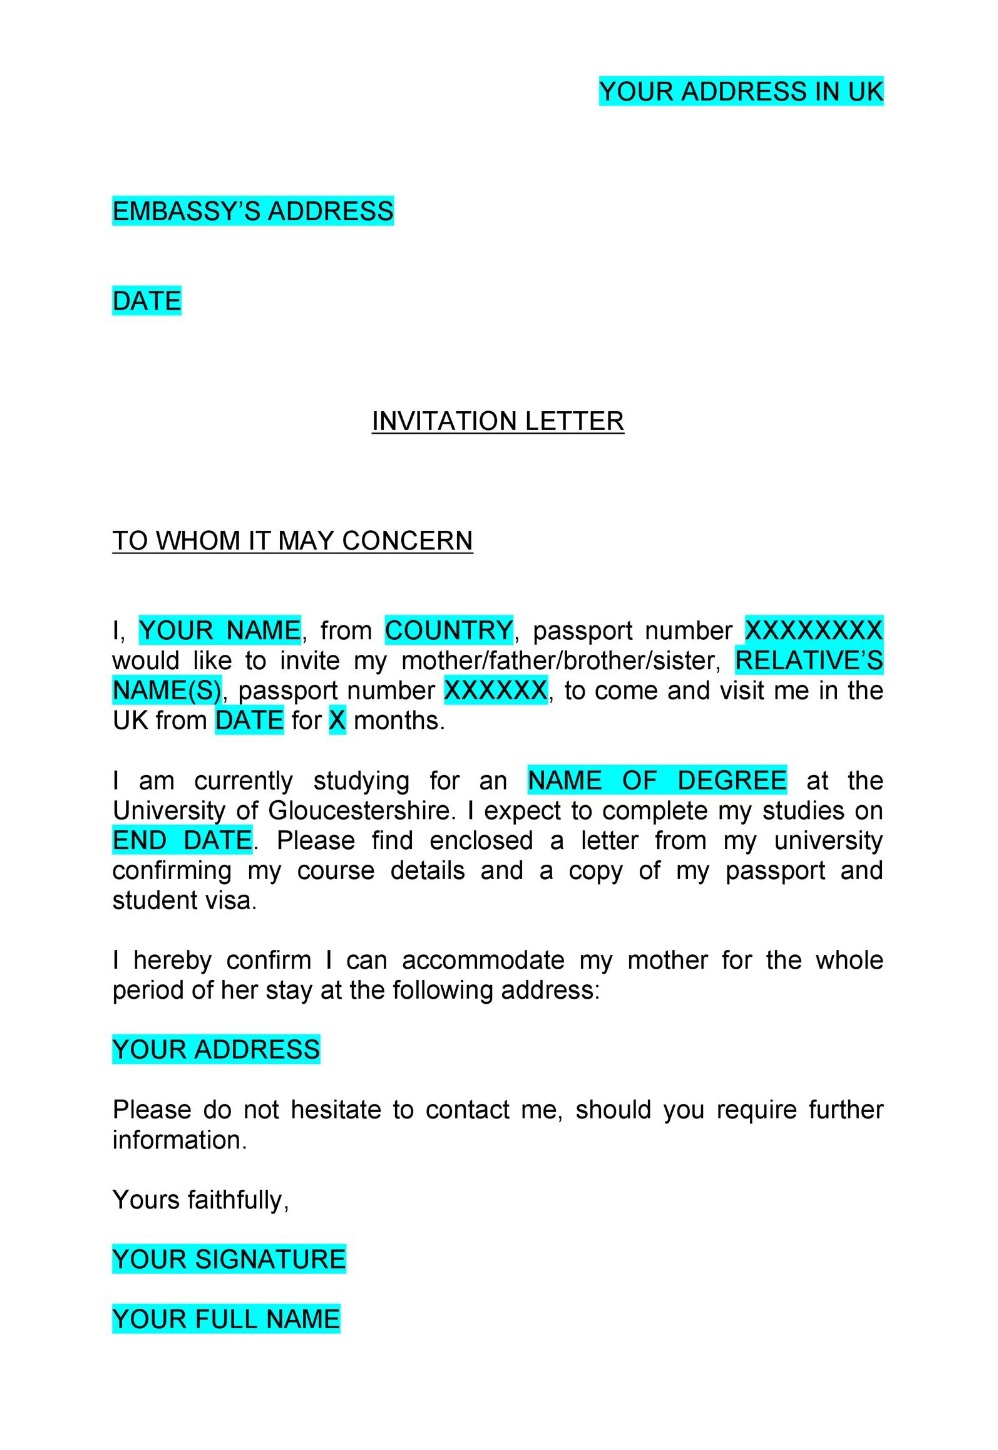 sample to whom it may concern invitation letter